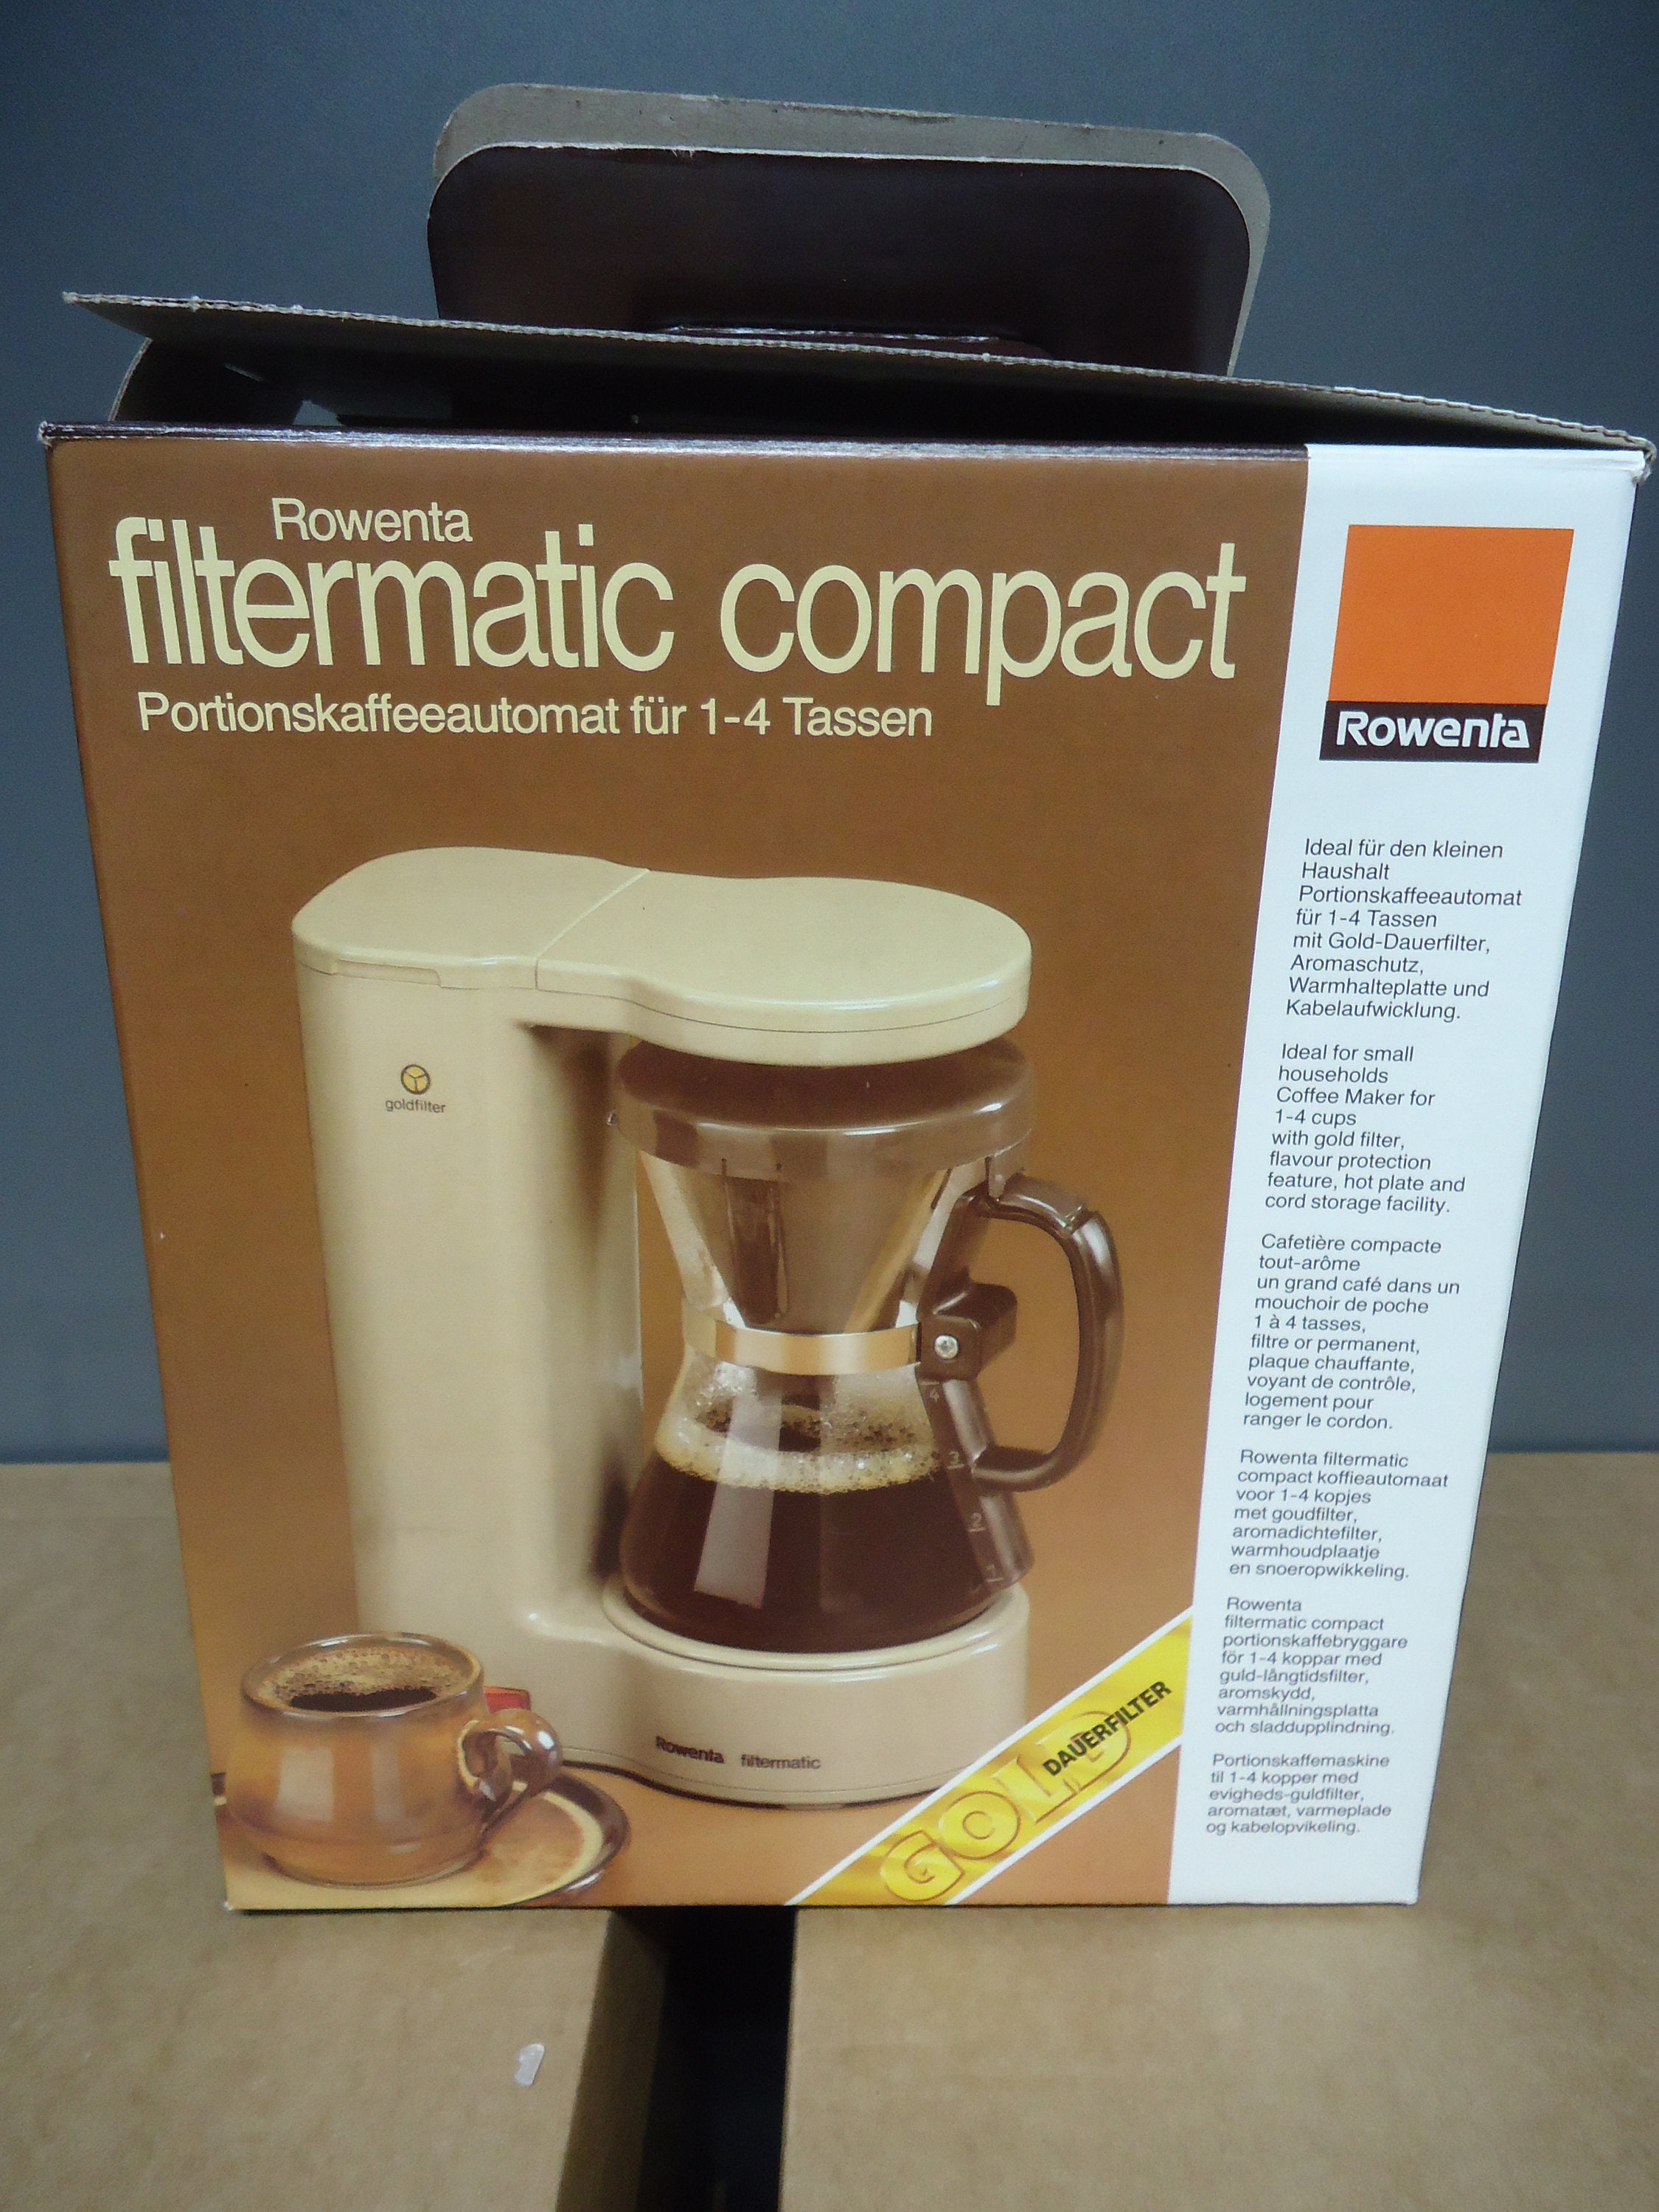 Rowenta Filtermatic Compact Vintage Coffee Maker Gold Permanent